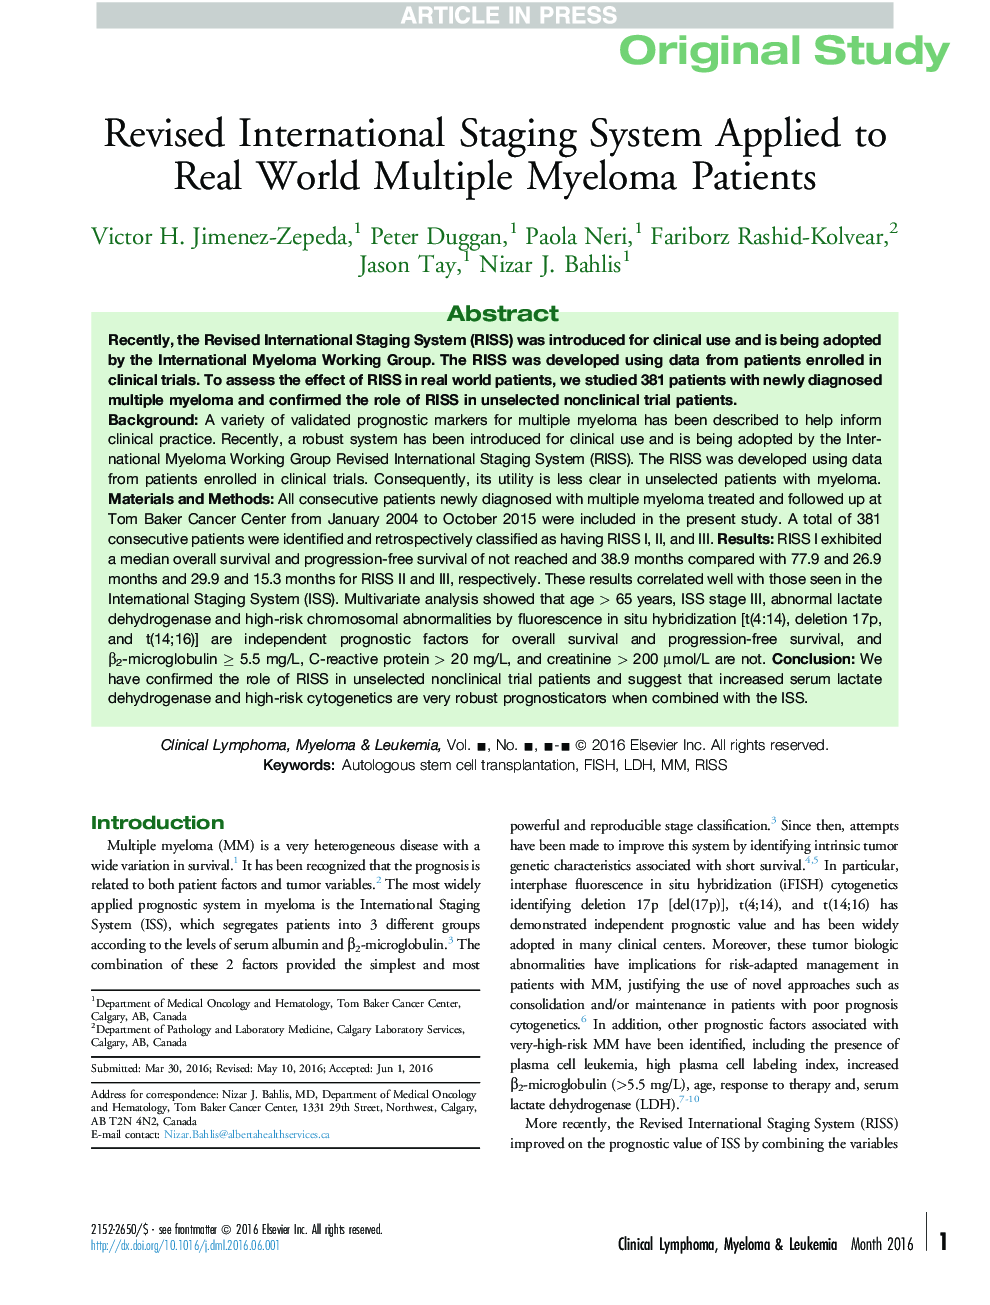 Revised International Staging System Applied to Real World Multiple Myeloma Patients